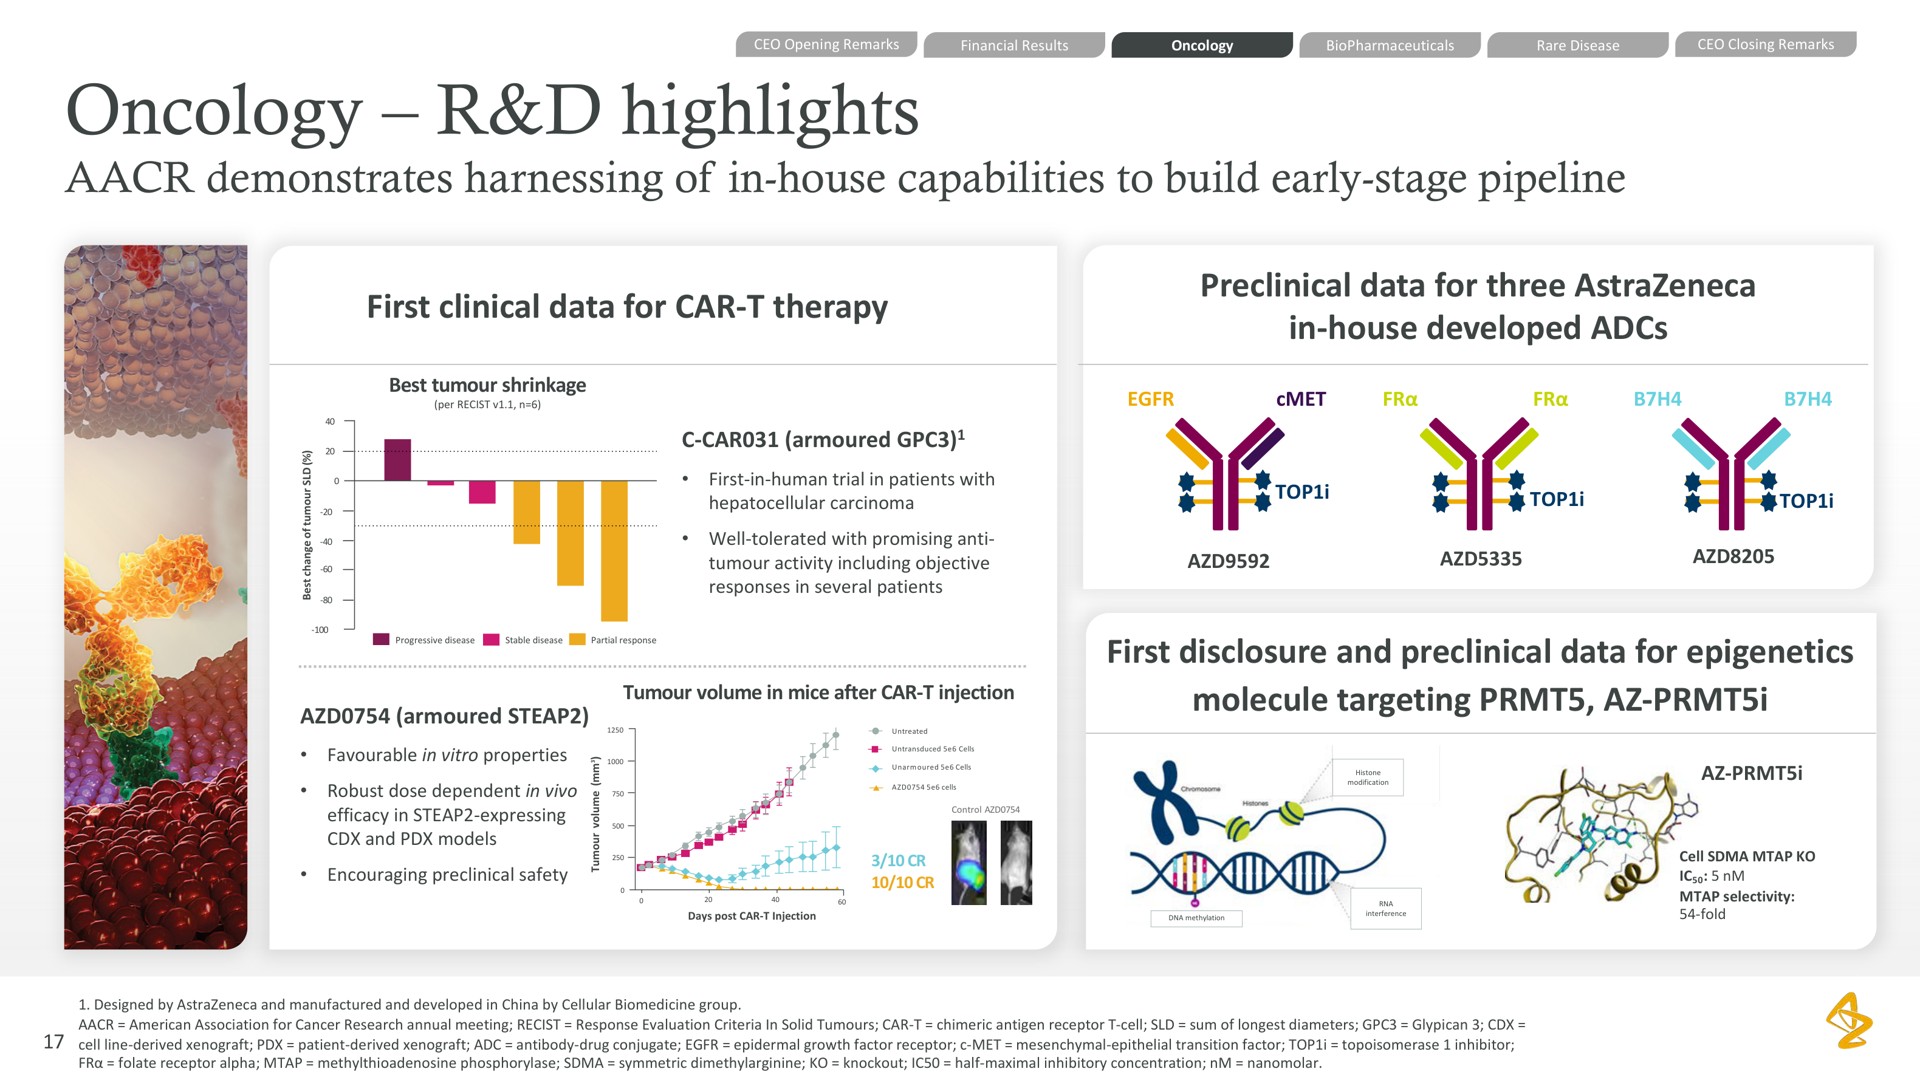 oncology highlights demonstrates harnessing of in house capabilities to build early stage pipeline first clinical data for car therapy preclinical data for three in house developed first disclosure and preclinical data for molecule targeting i | AstraZeneca